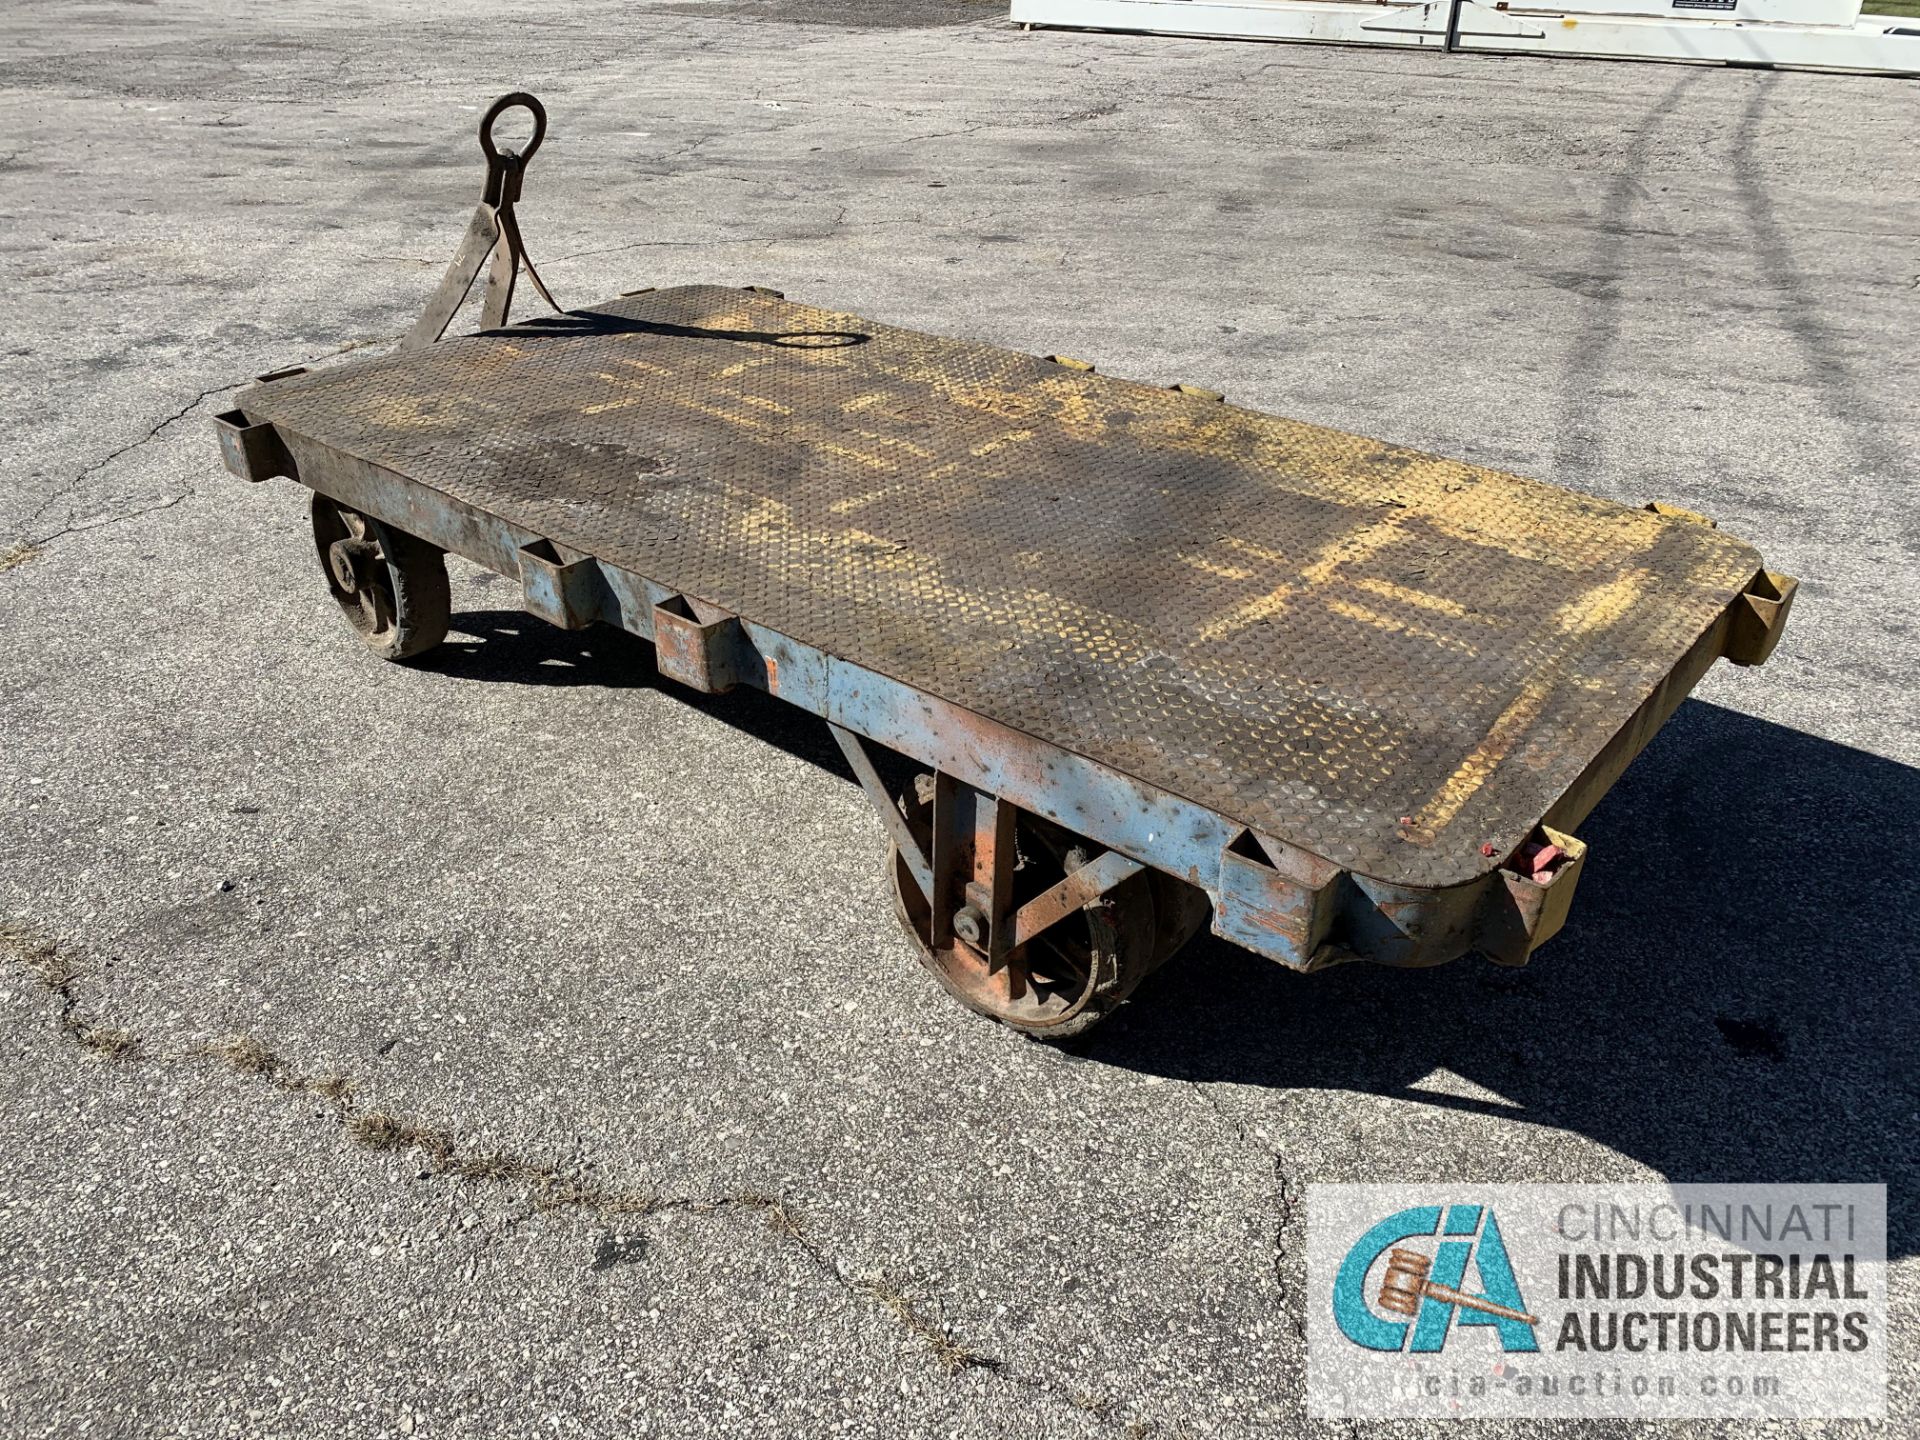 48" X 96" LOW PROFILE HEAVY DUTY STEEL TRANSFER CART - $20.00 Rigging Fee Due to Onsite Rigger - - Image 2 of 2